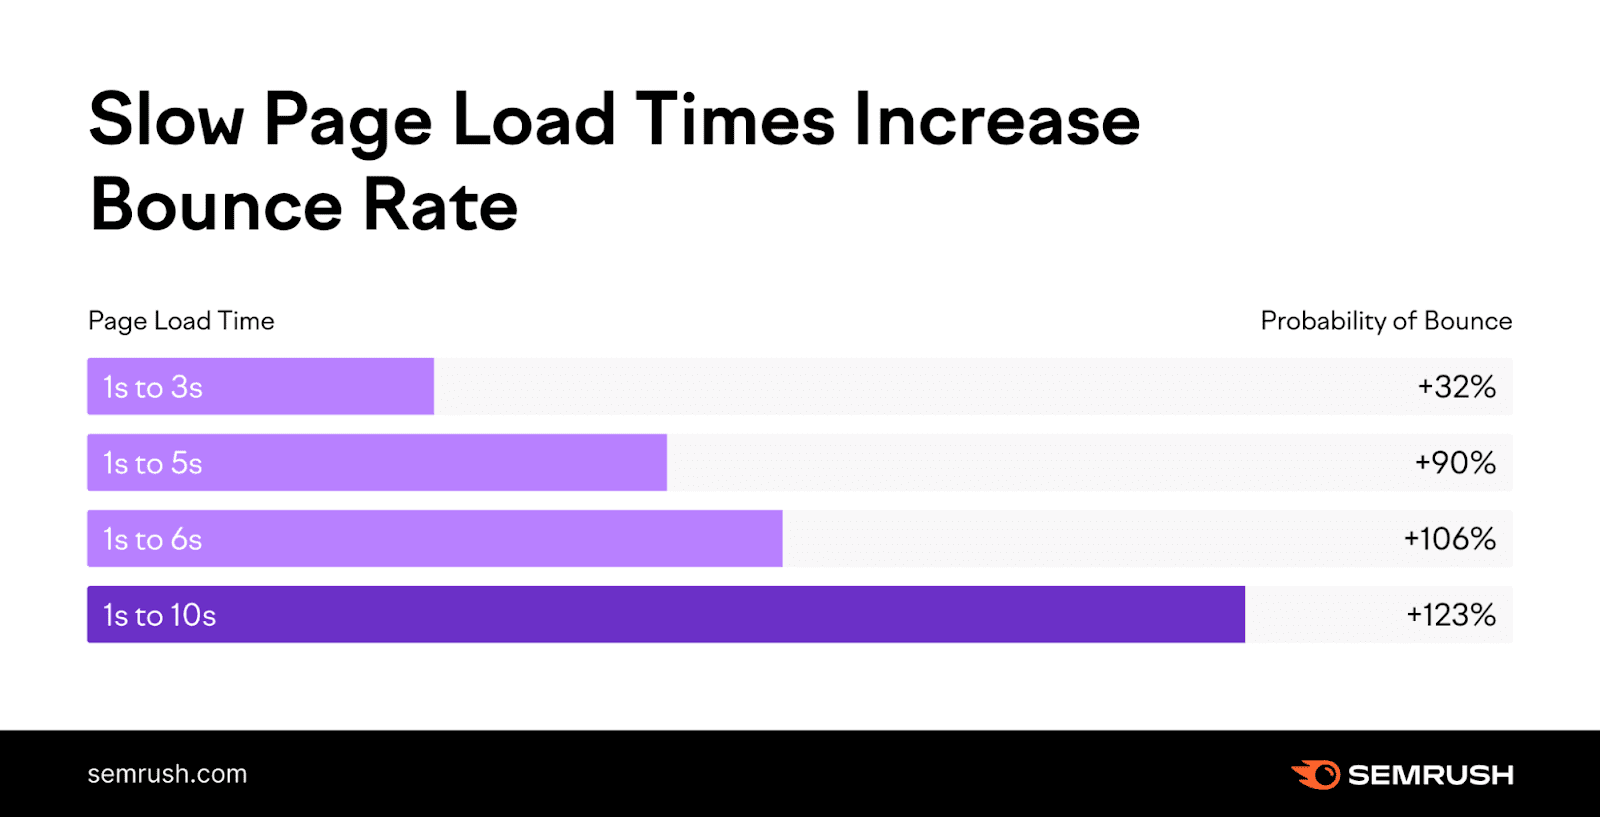 A chart showing how slow page load times increase bounce rate